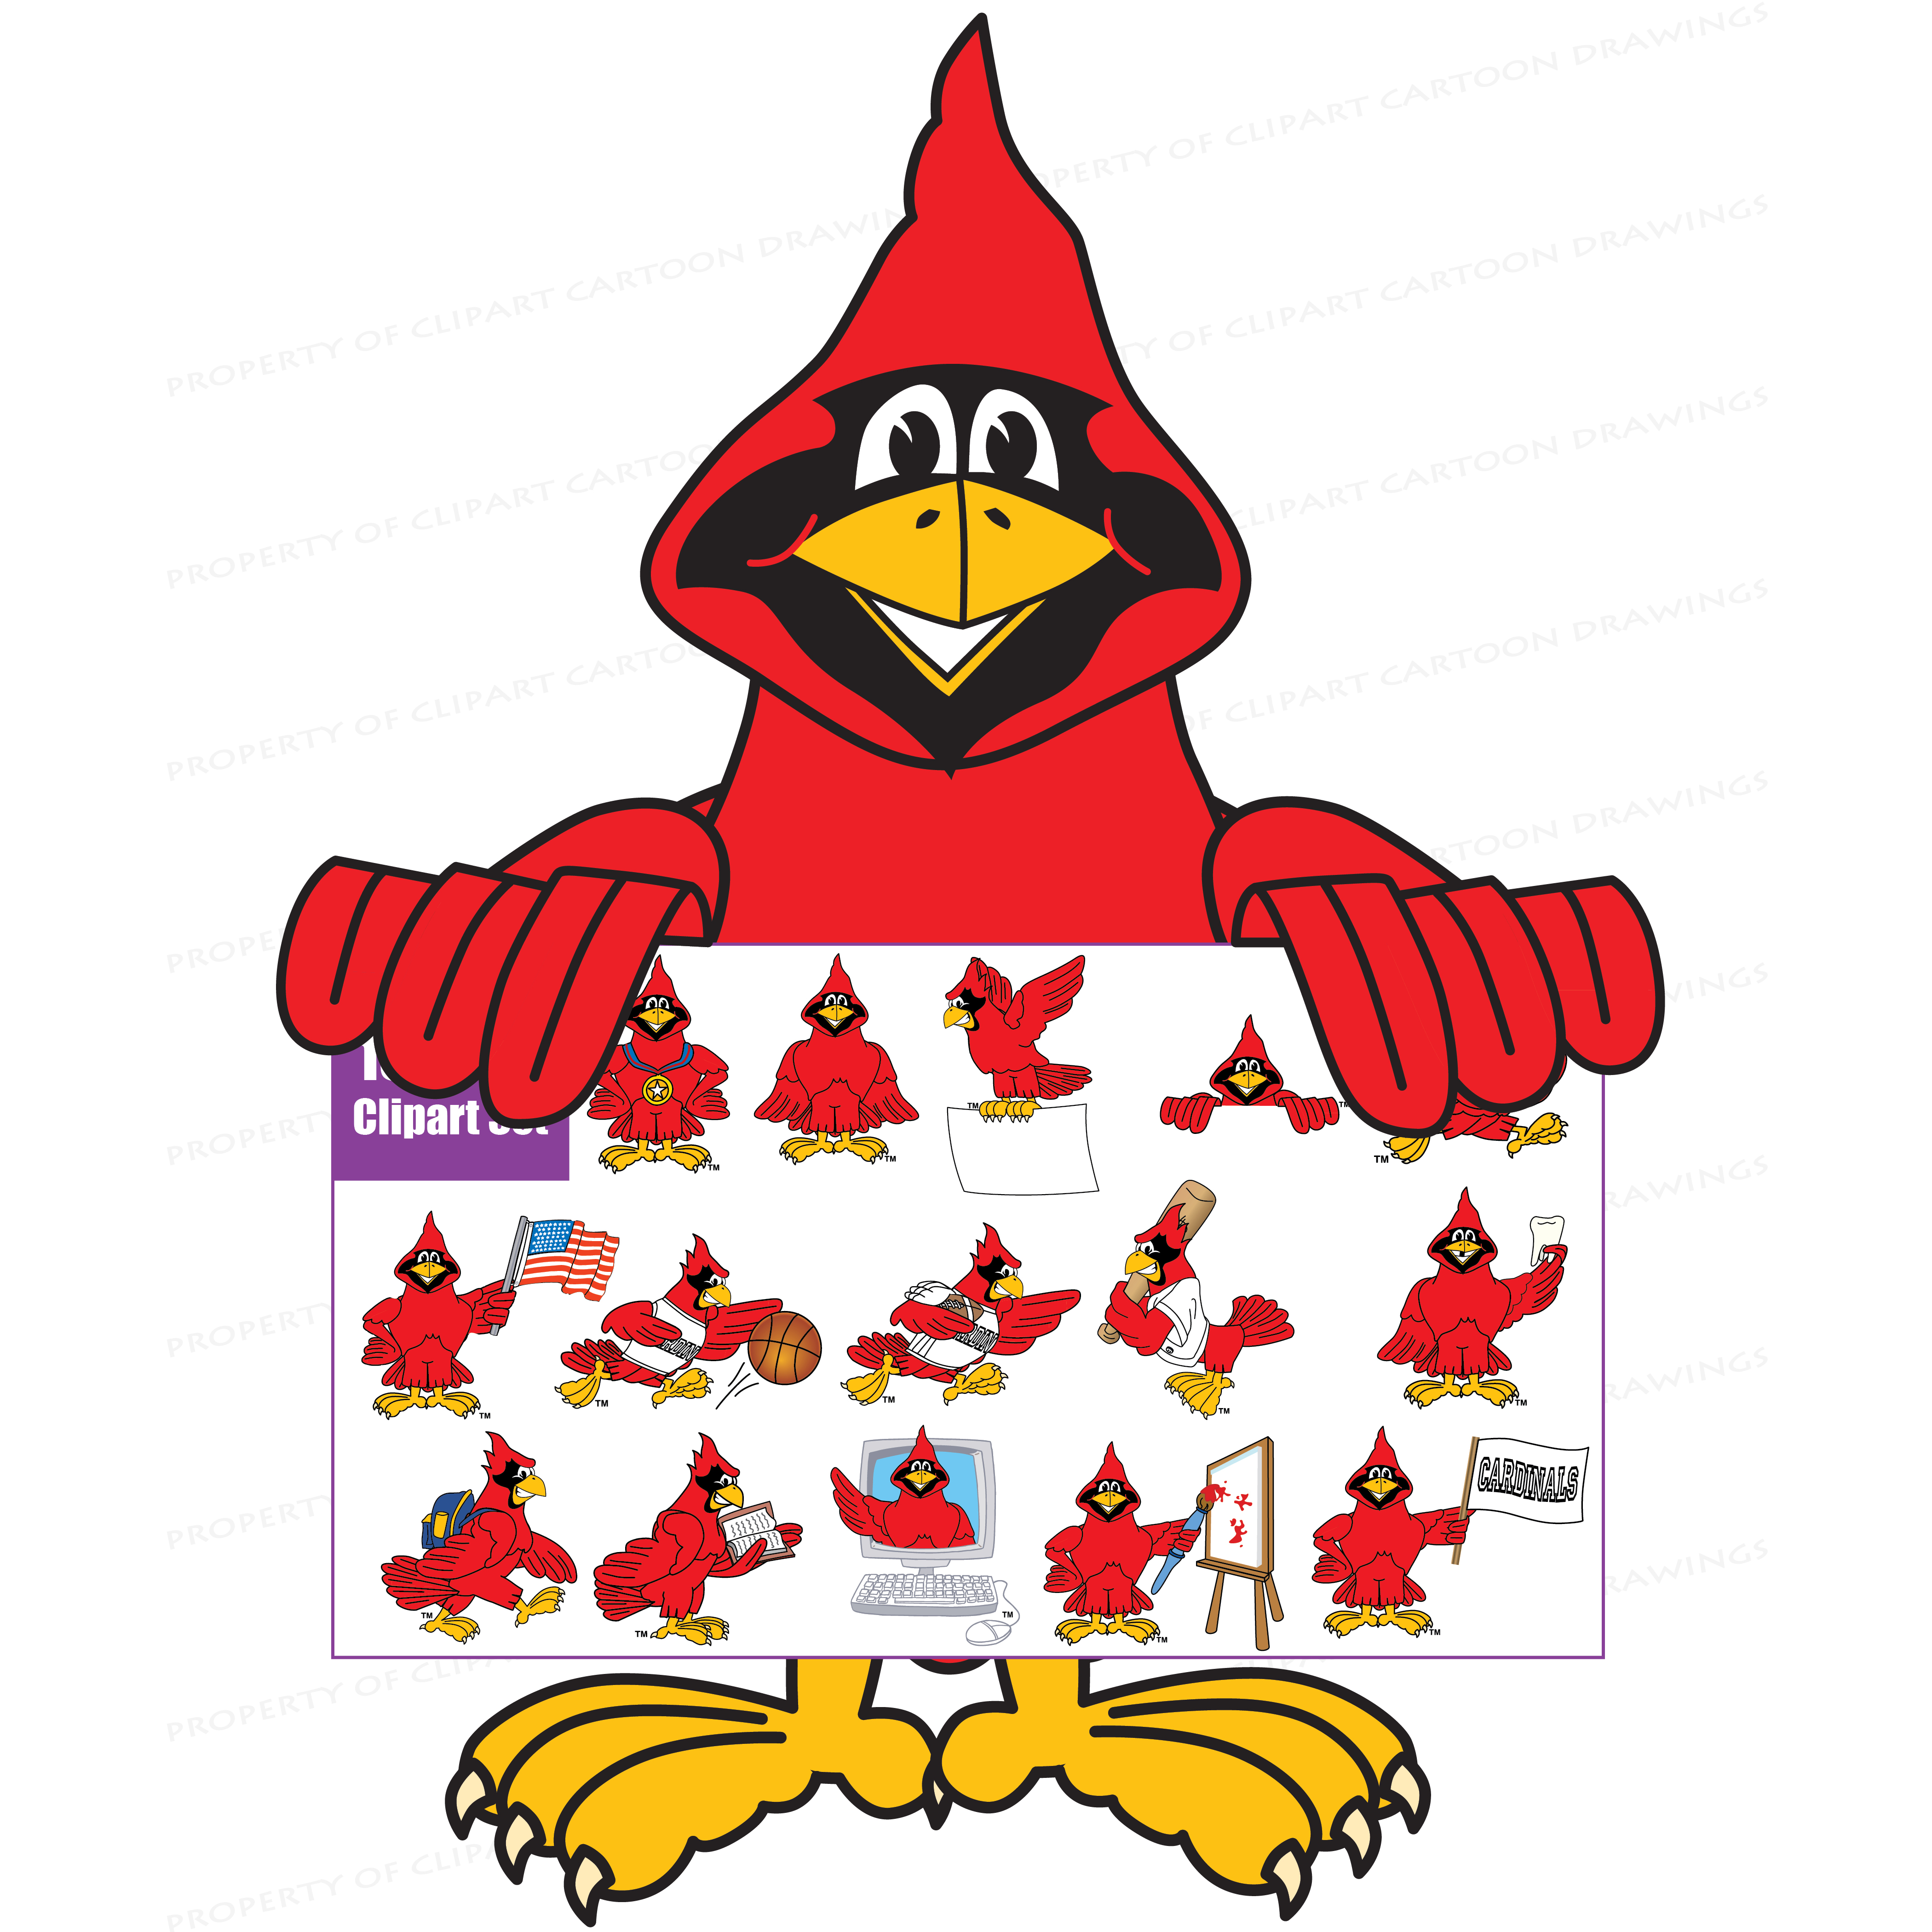 Cardinal Collection Hd Image Clipart